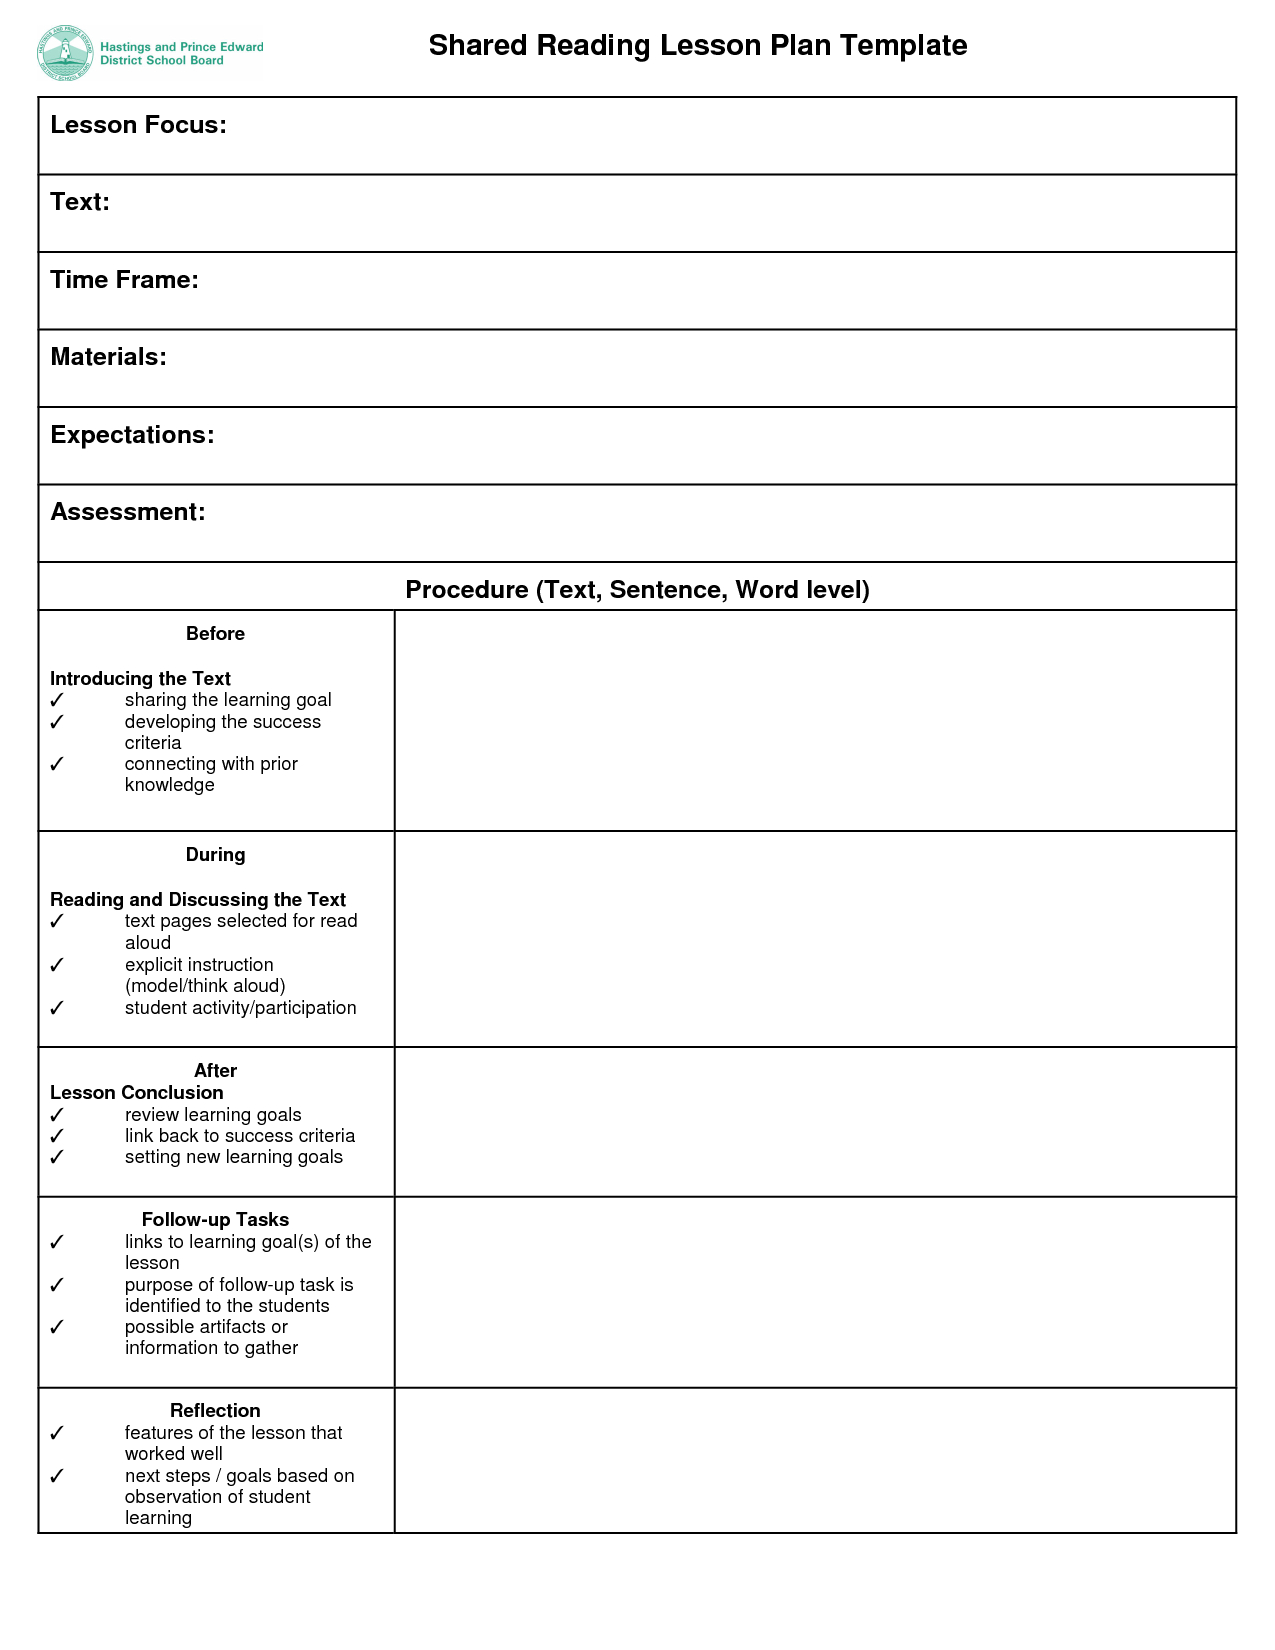 Shared Reading Lesson Plan Template | Shared Reading Lesson